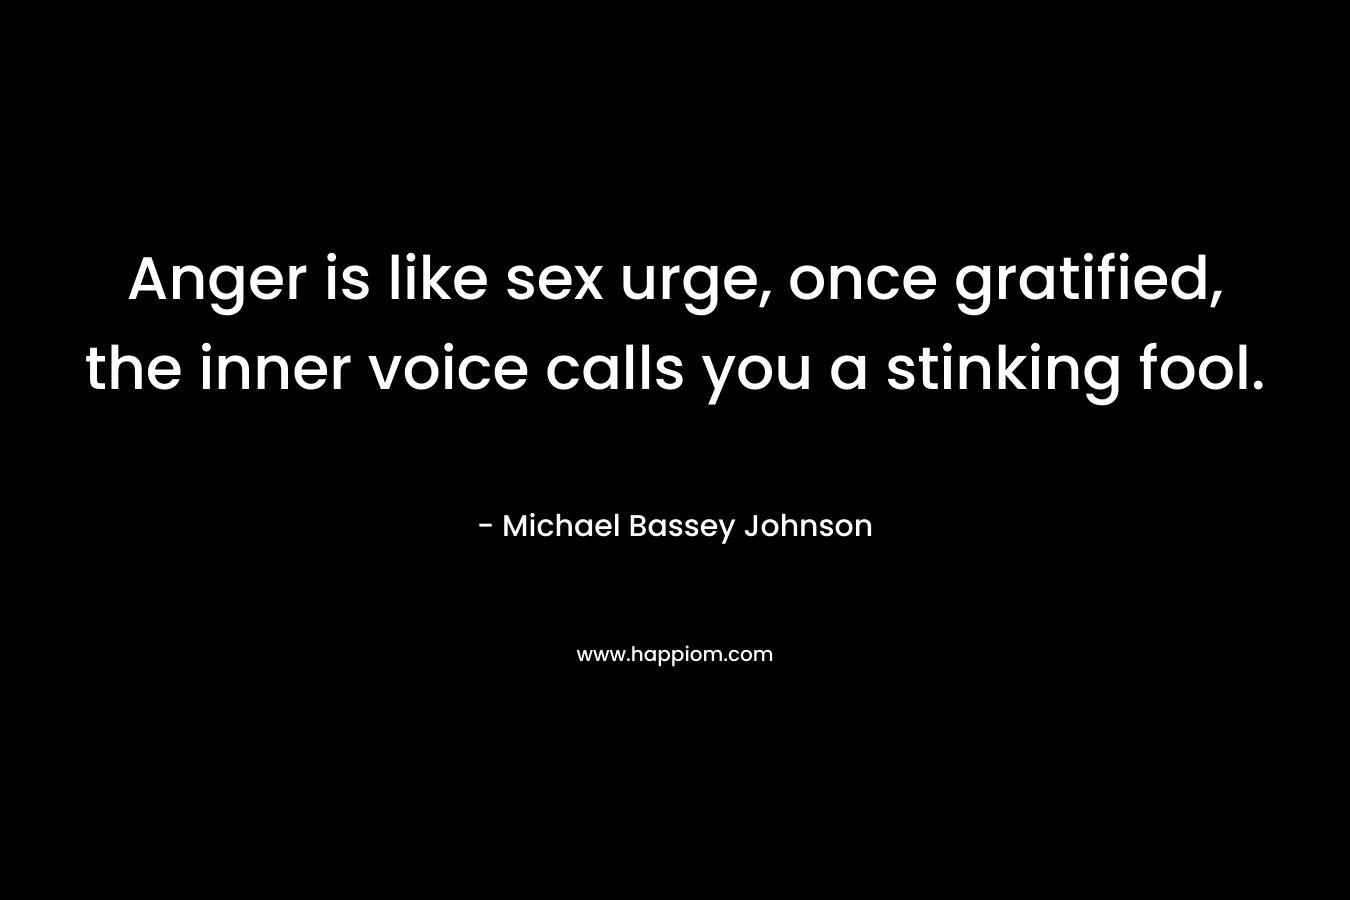 Anger is like sex urge, once gratified, the inner voice calls you a stinking fool.